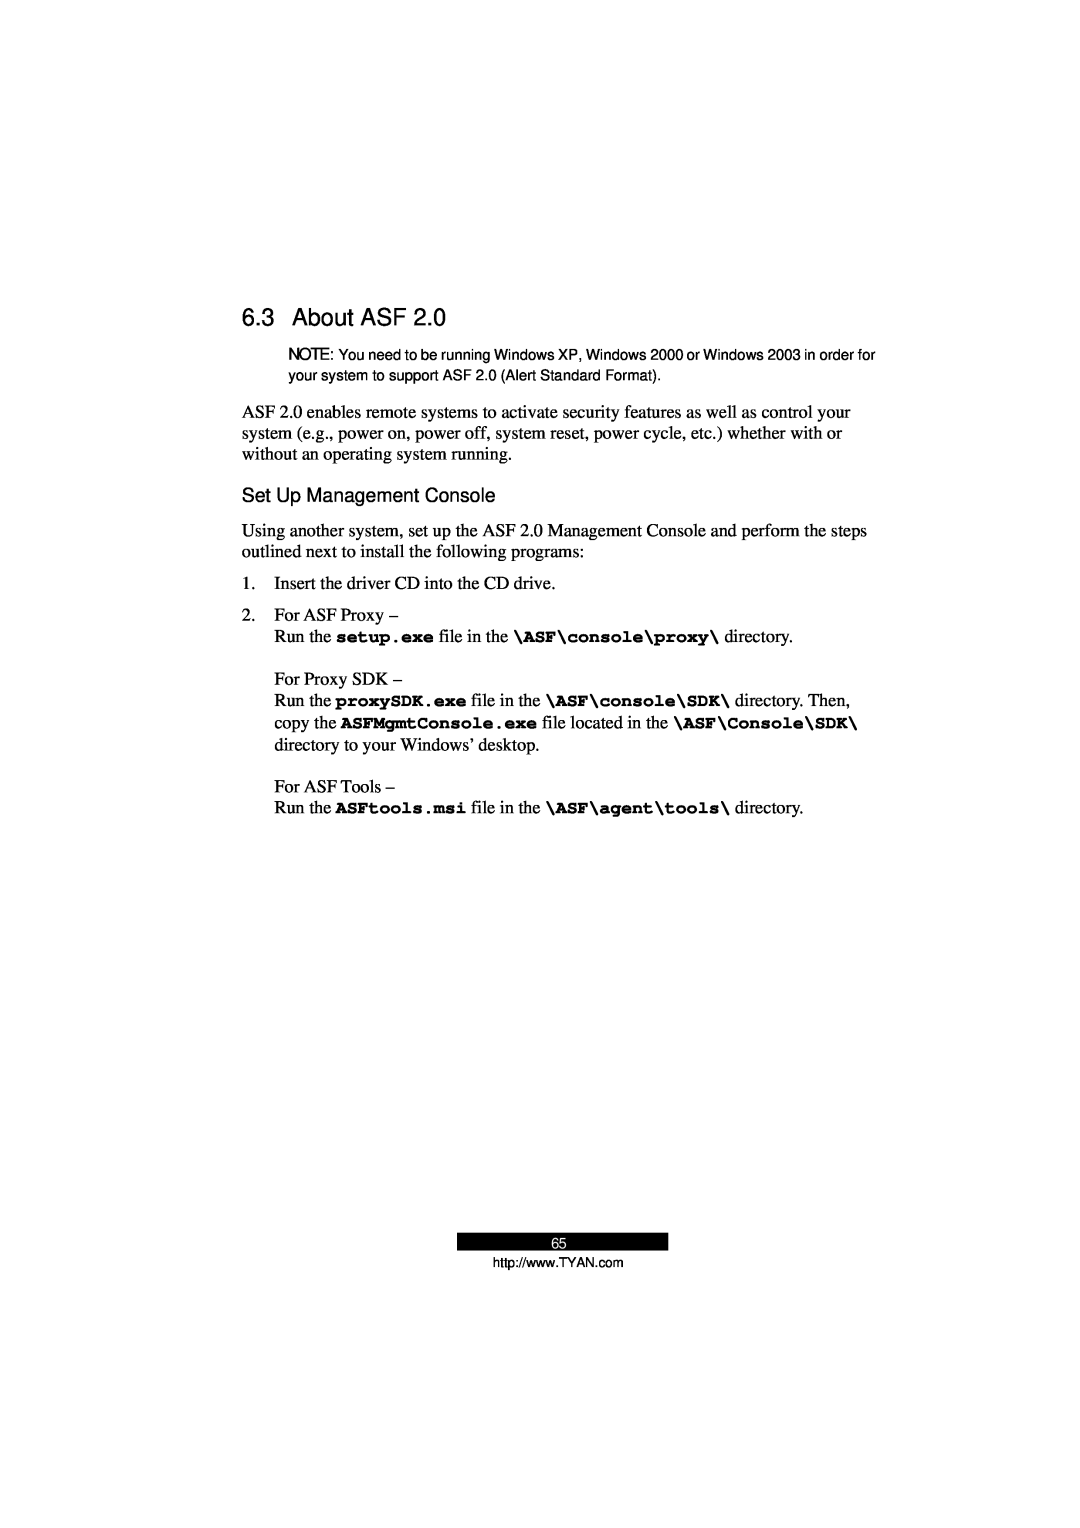 Tyan Computer B5103G12S2, Transport GS12 manual About ASF, Set Up Management Console 